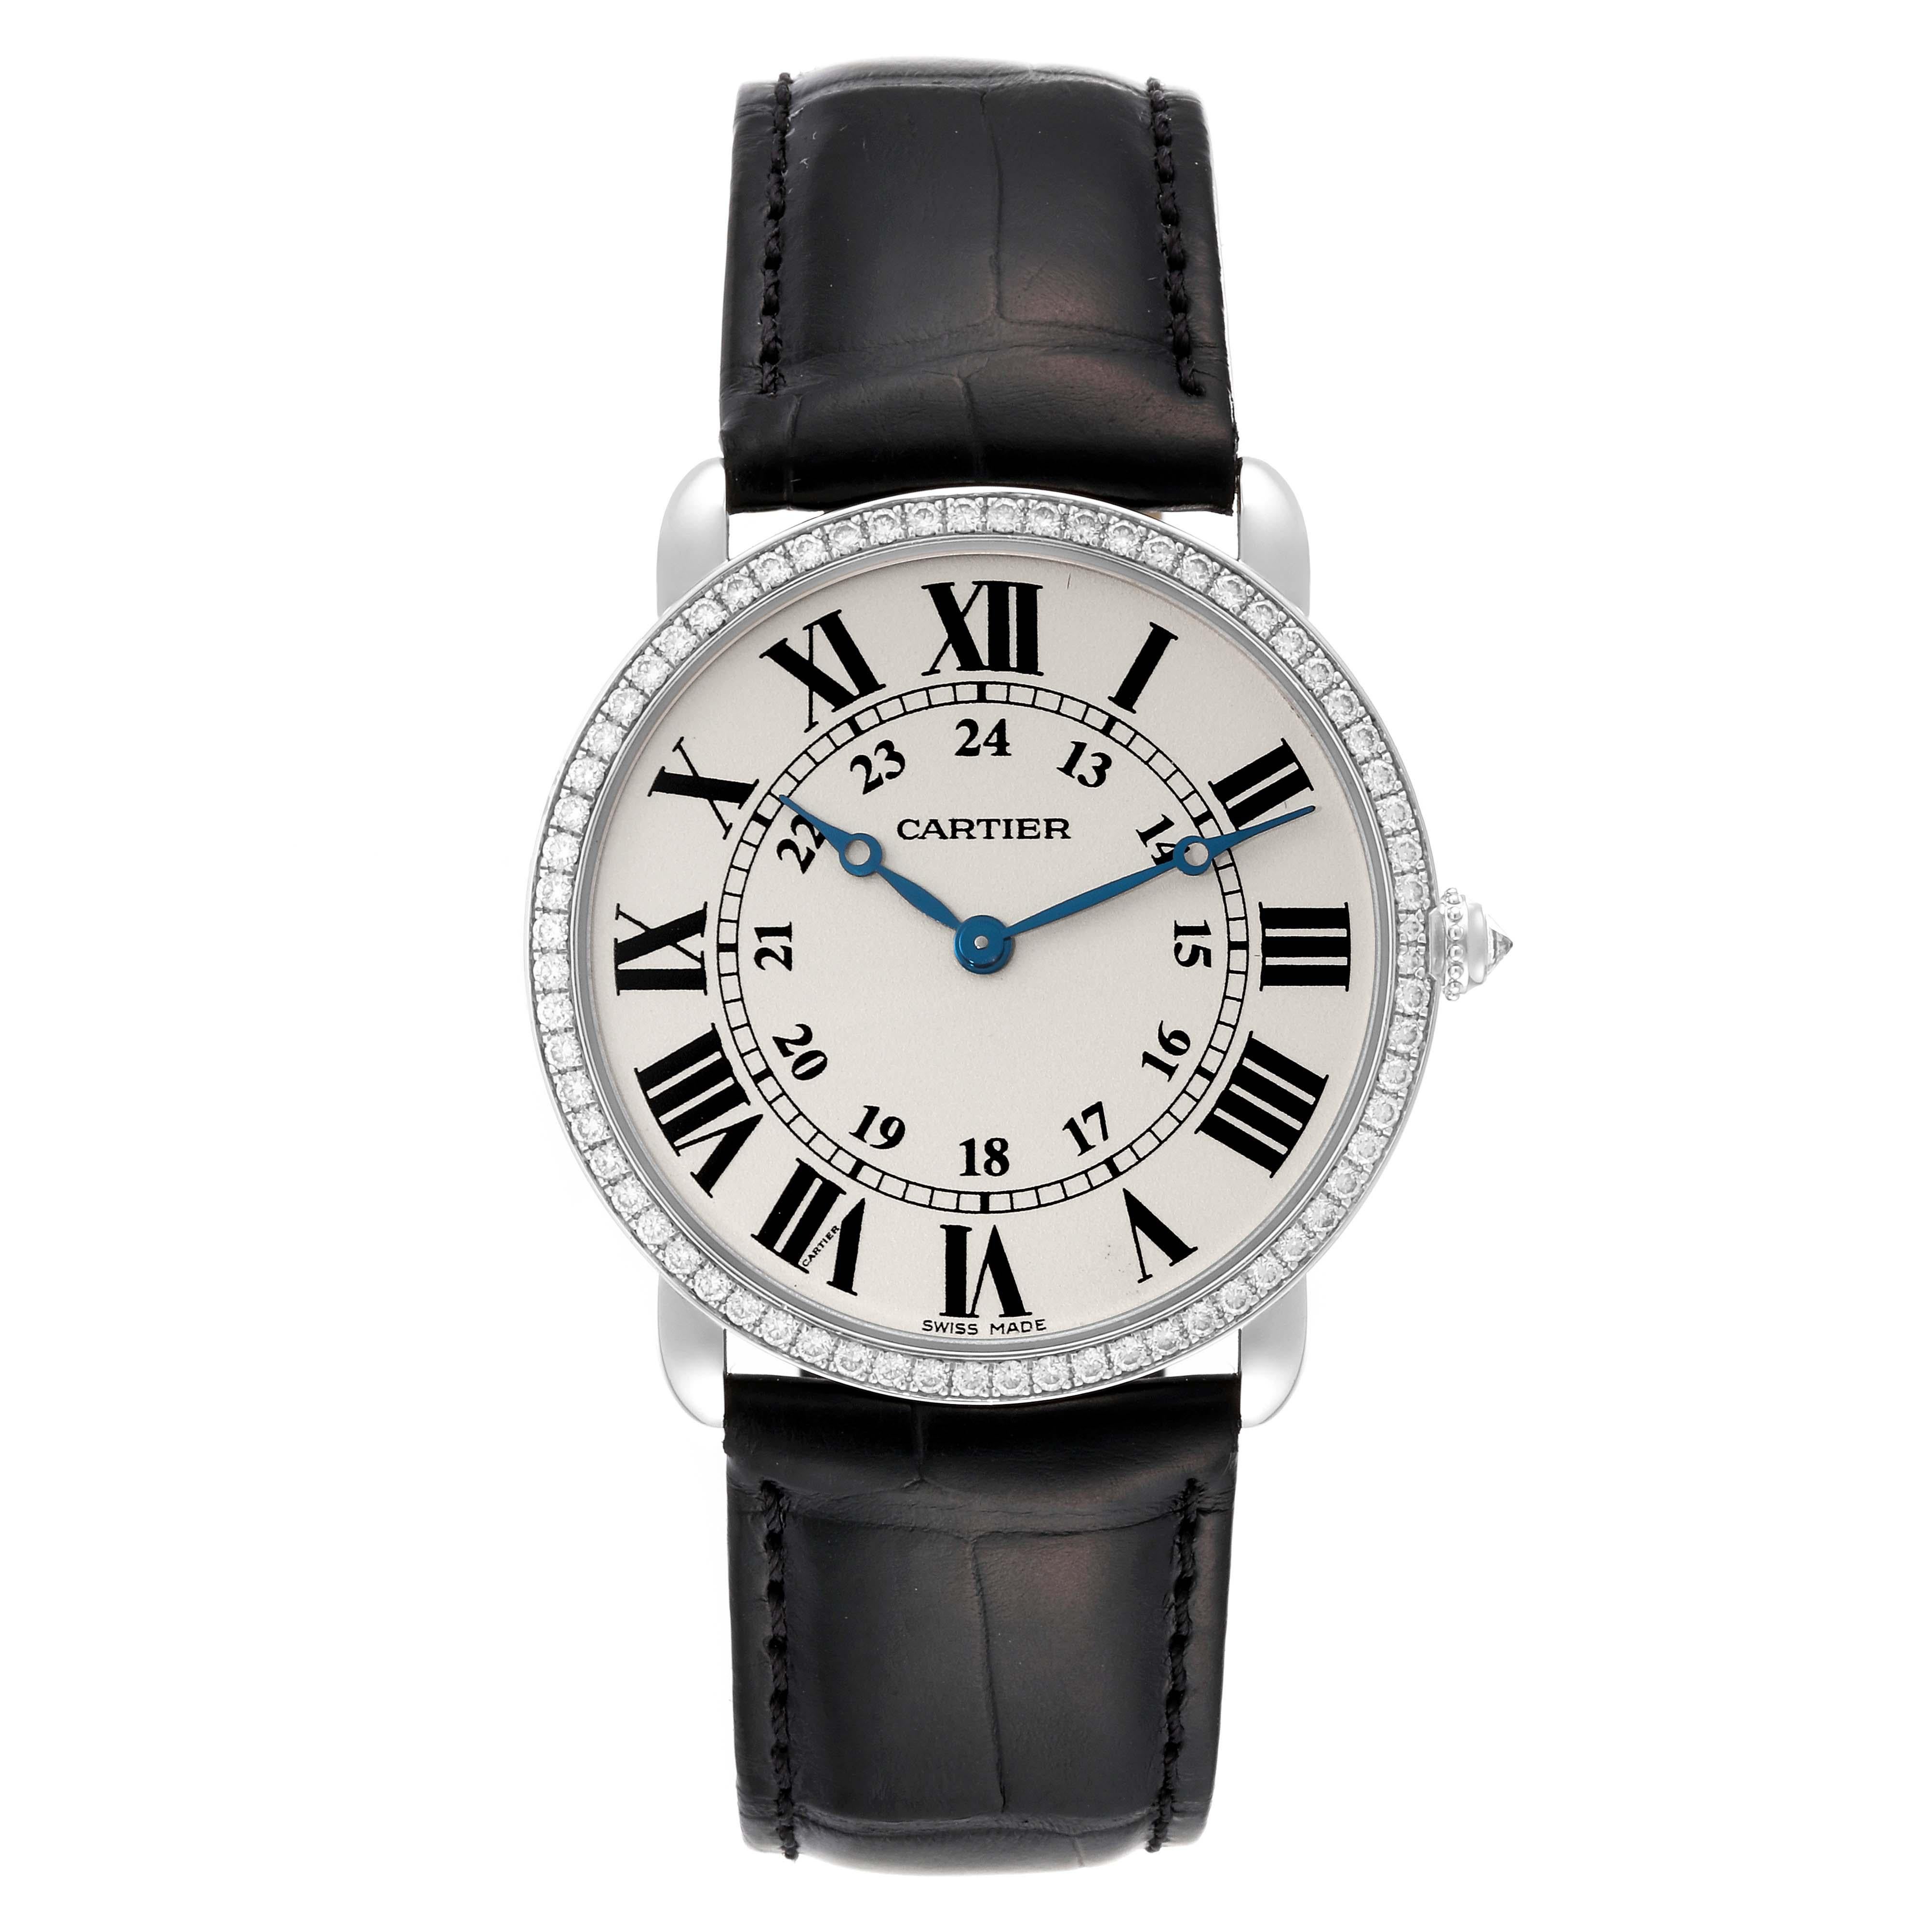 Cartier Ronde Louis White Gold Diamond Mens Watch WR000551 Box Card. Manual winding movement. 18k white gold case 36 mm in diameter. Circular grained crown set with an original Cartier factory diamond. Original Cartier factory diamond bezel. Scratch